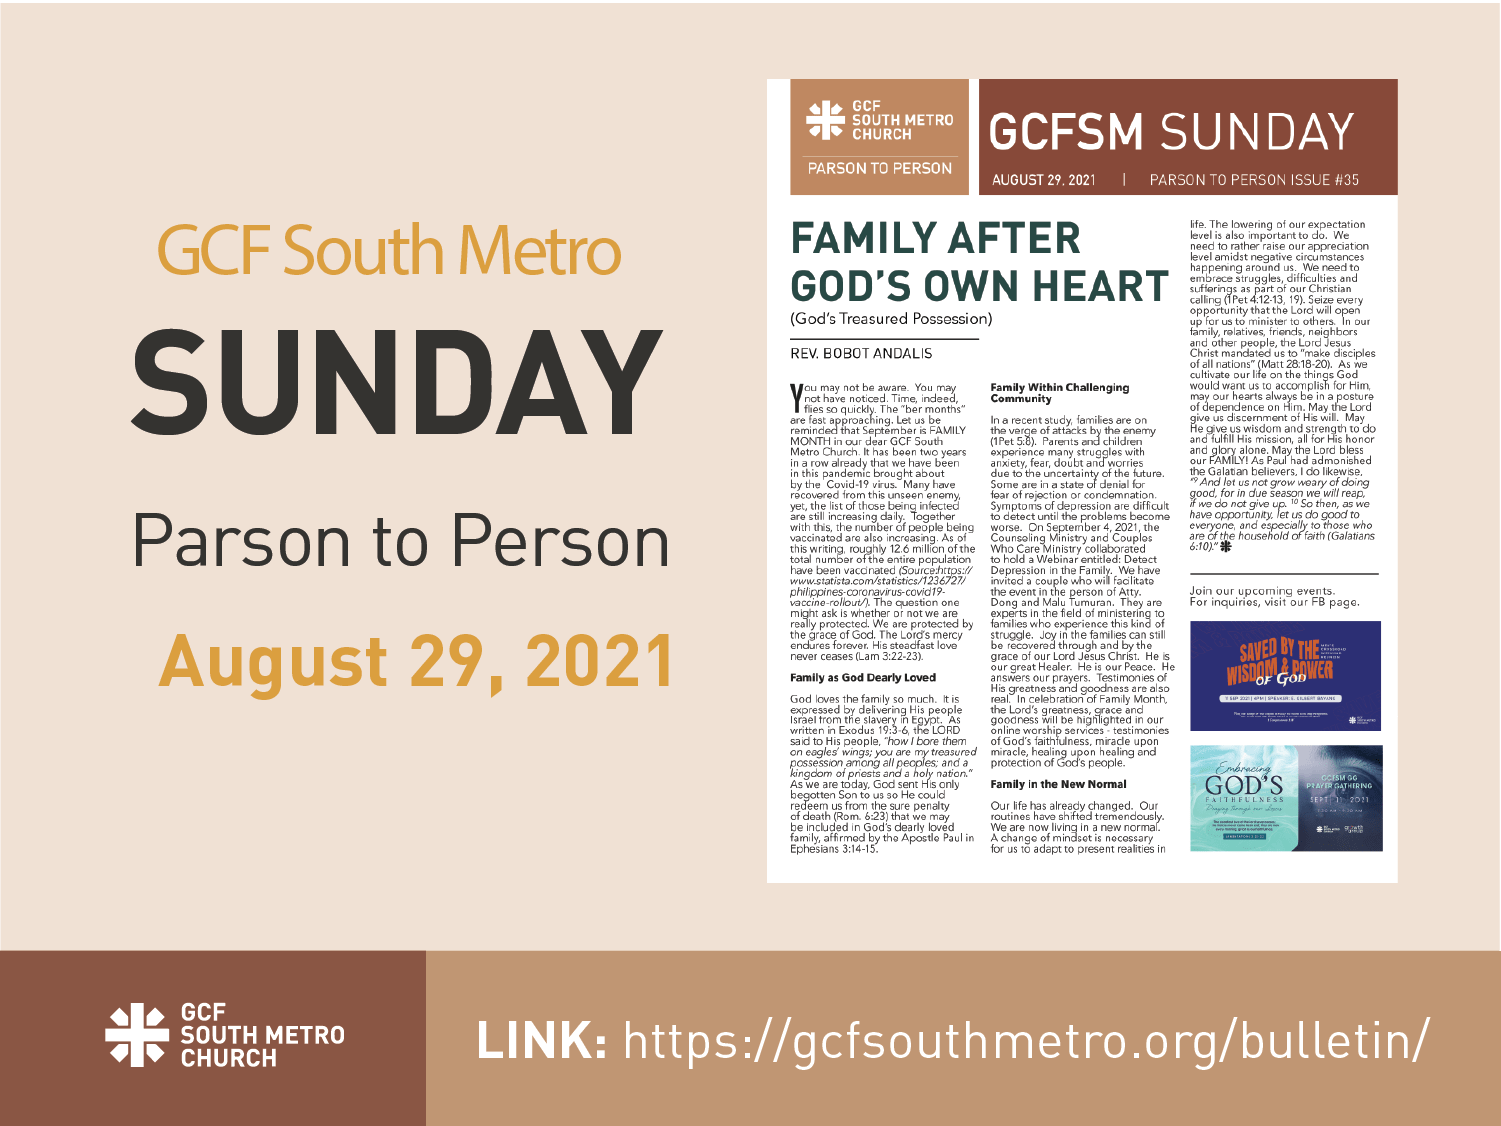 Sunday Bulletin – Parson to Person, August 29, 2021